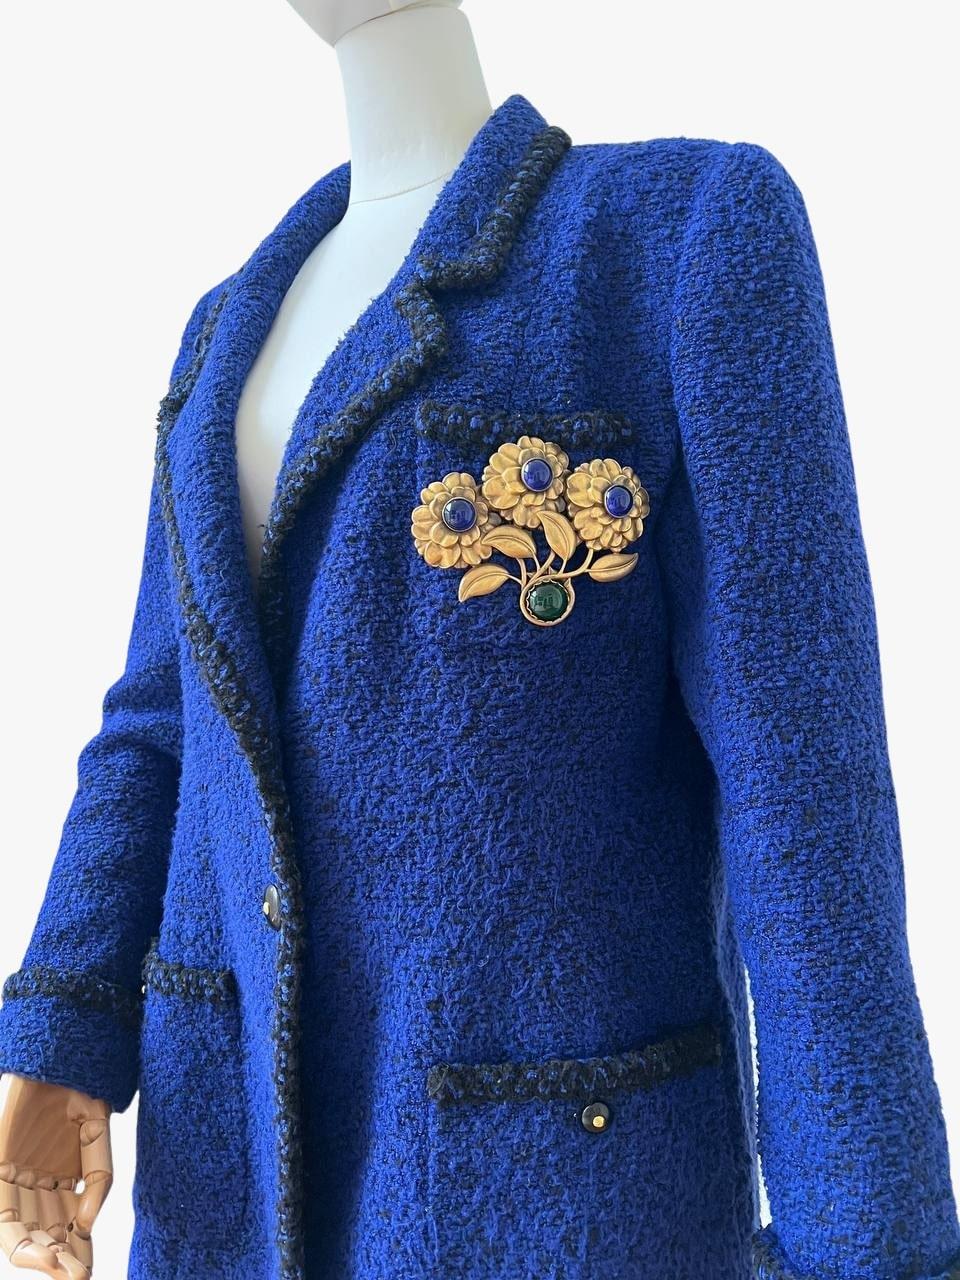 Vintage Blue Tweed Double-breasted Chanel Jacket, 1995 11